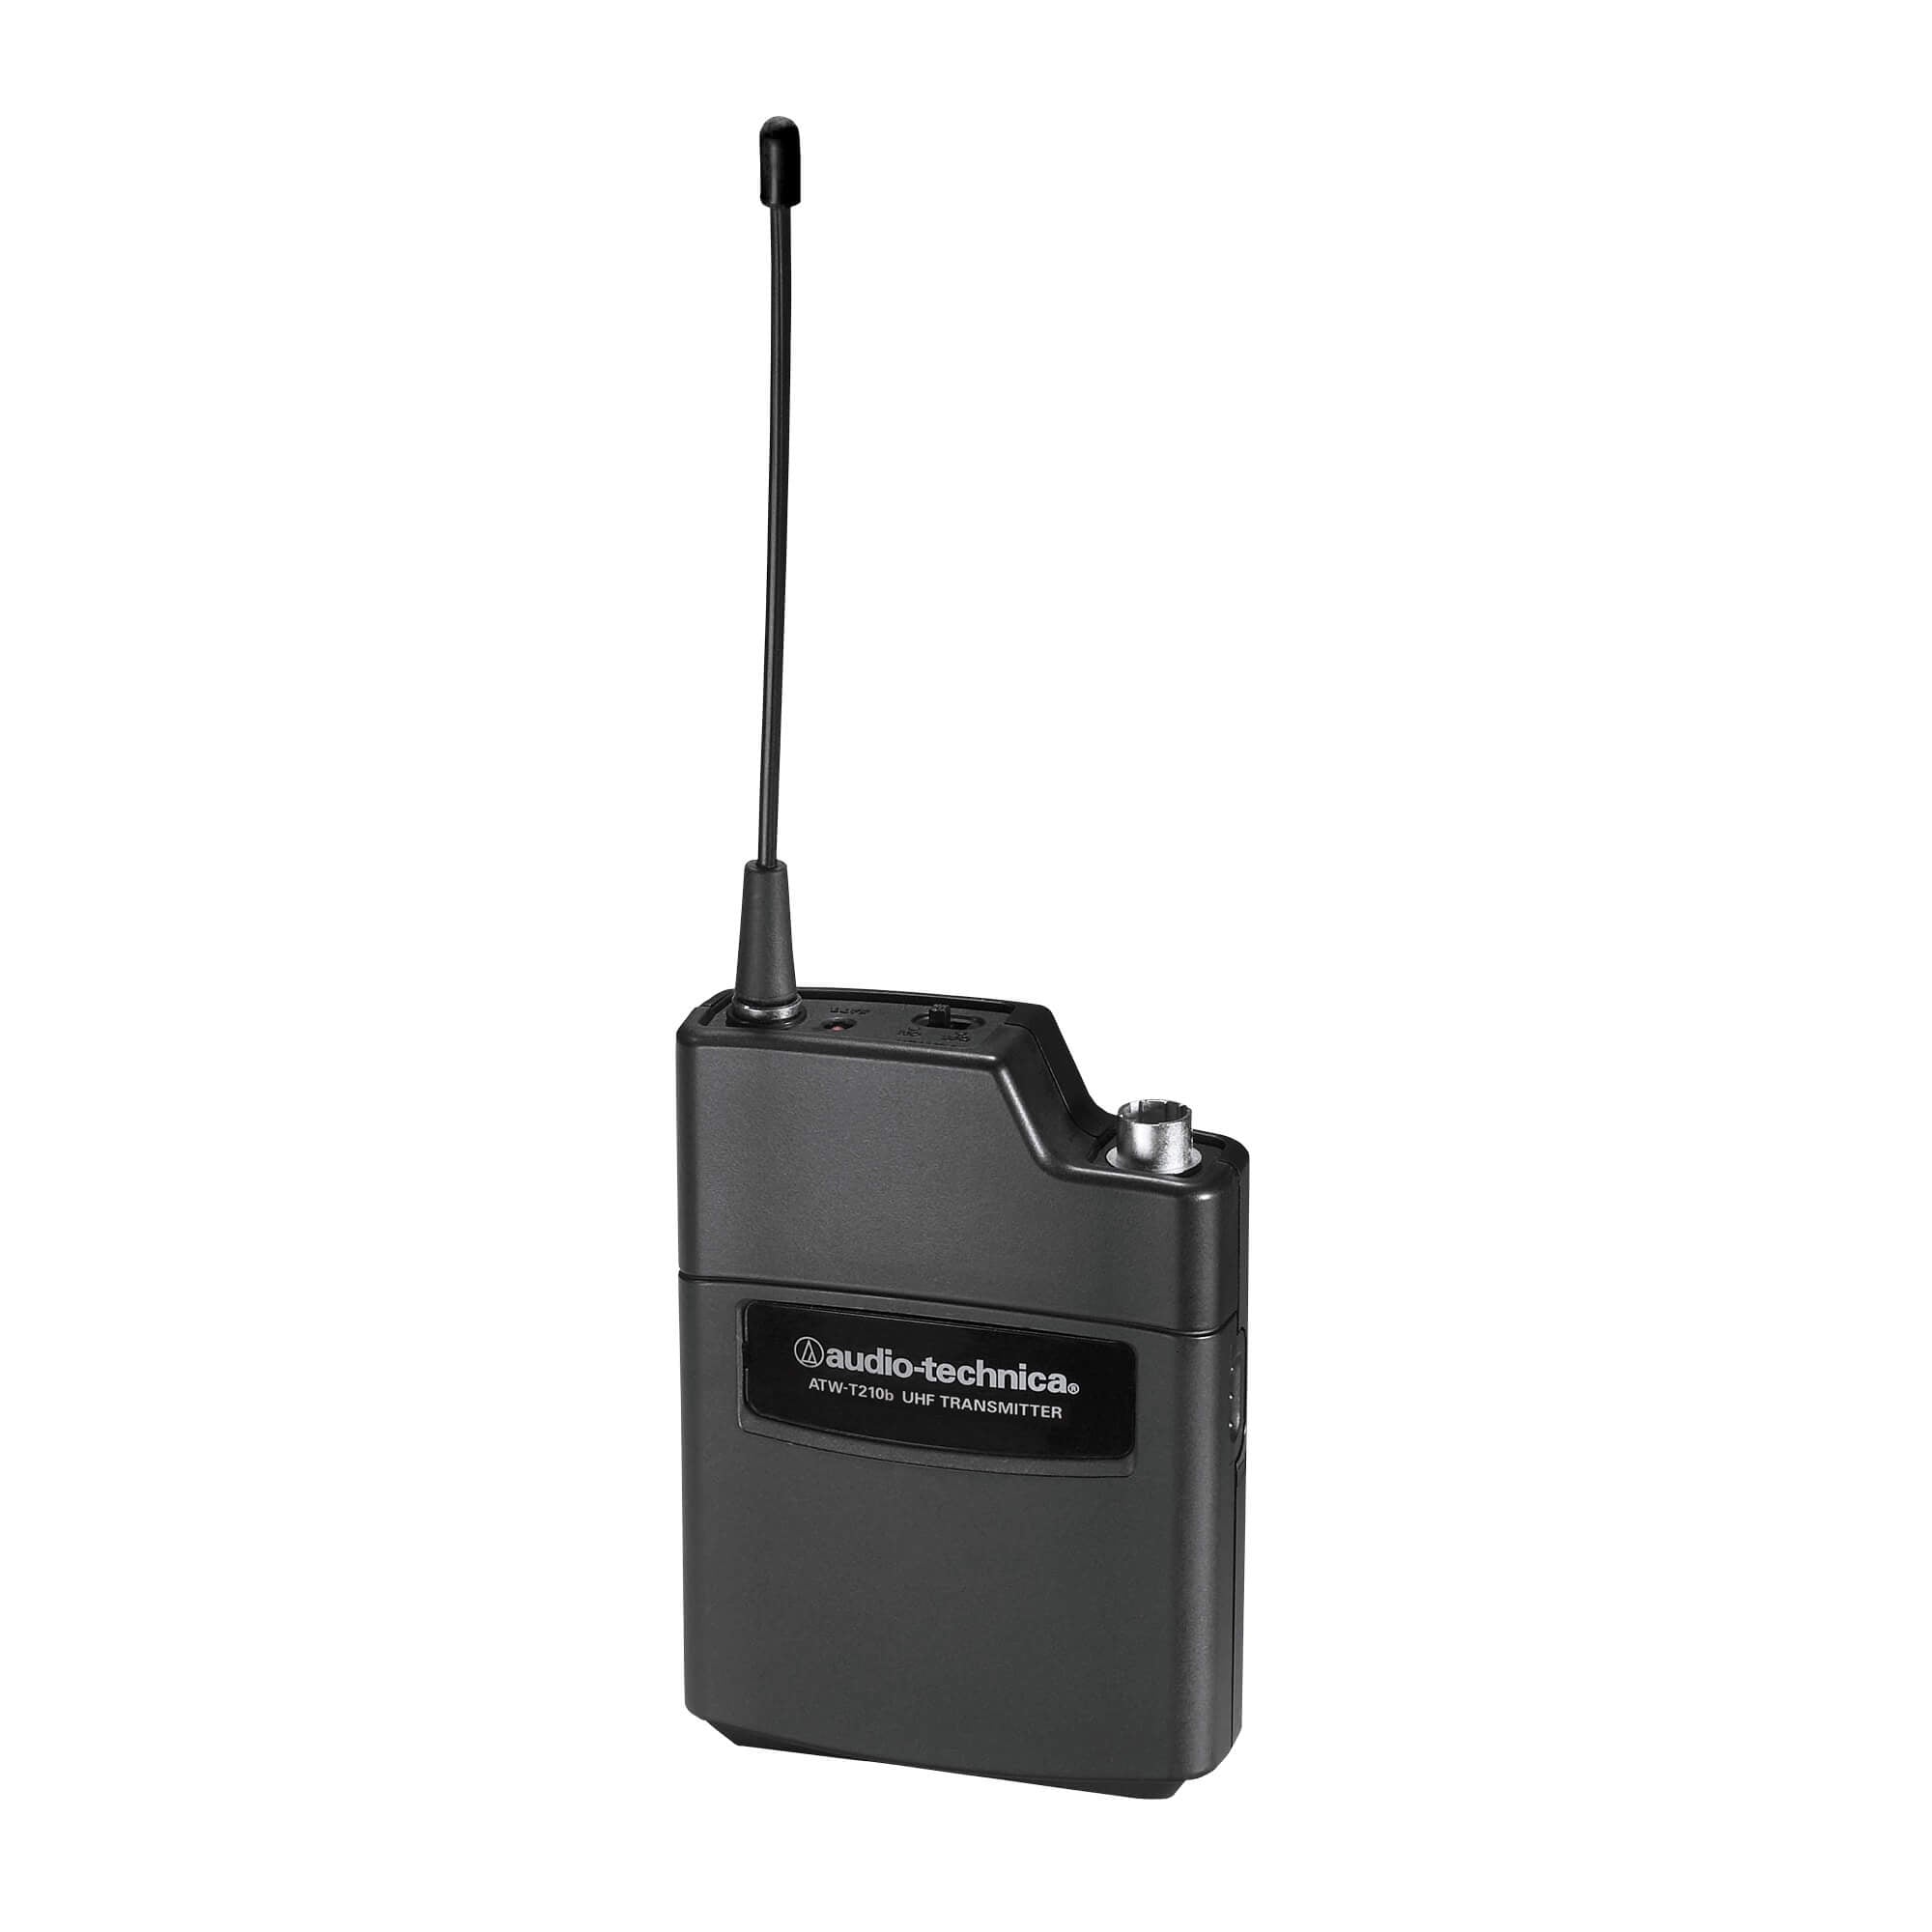 Audio-Technica ATW-T210c - Body-pack Transmitter (2000 Series), angle